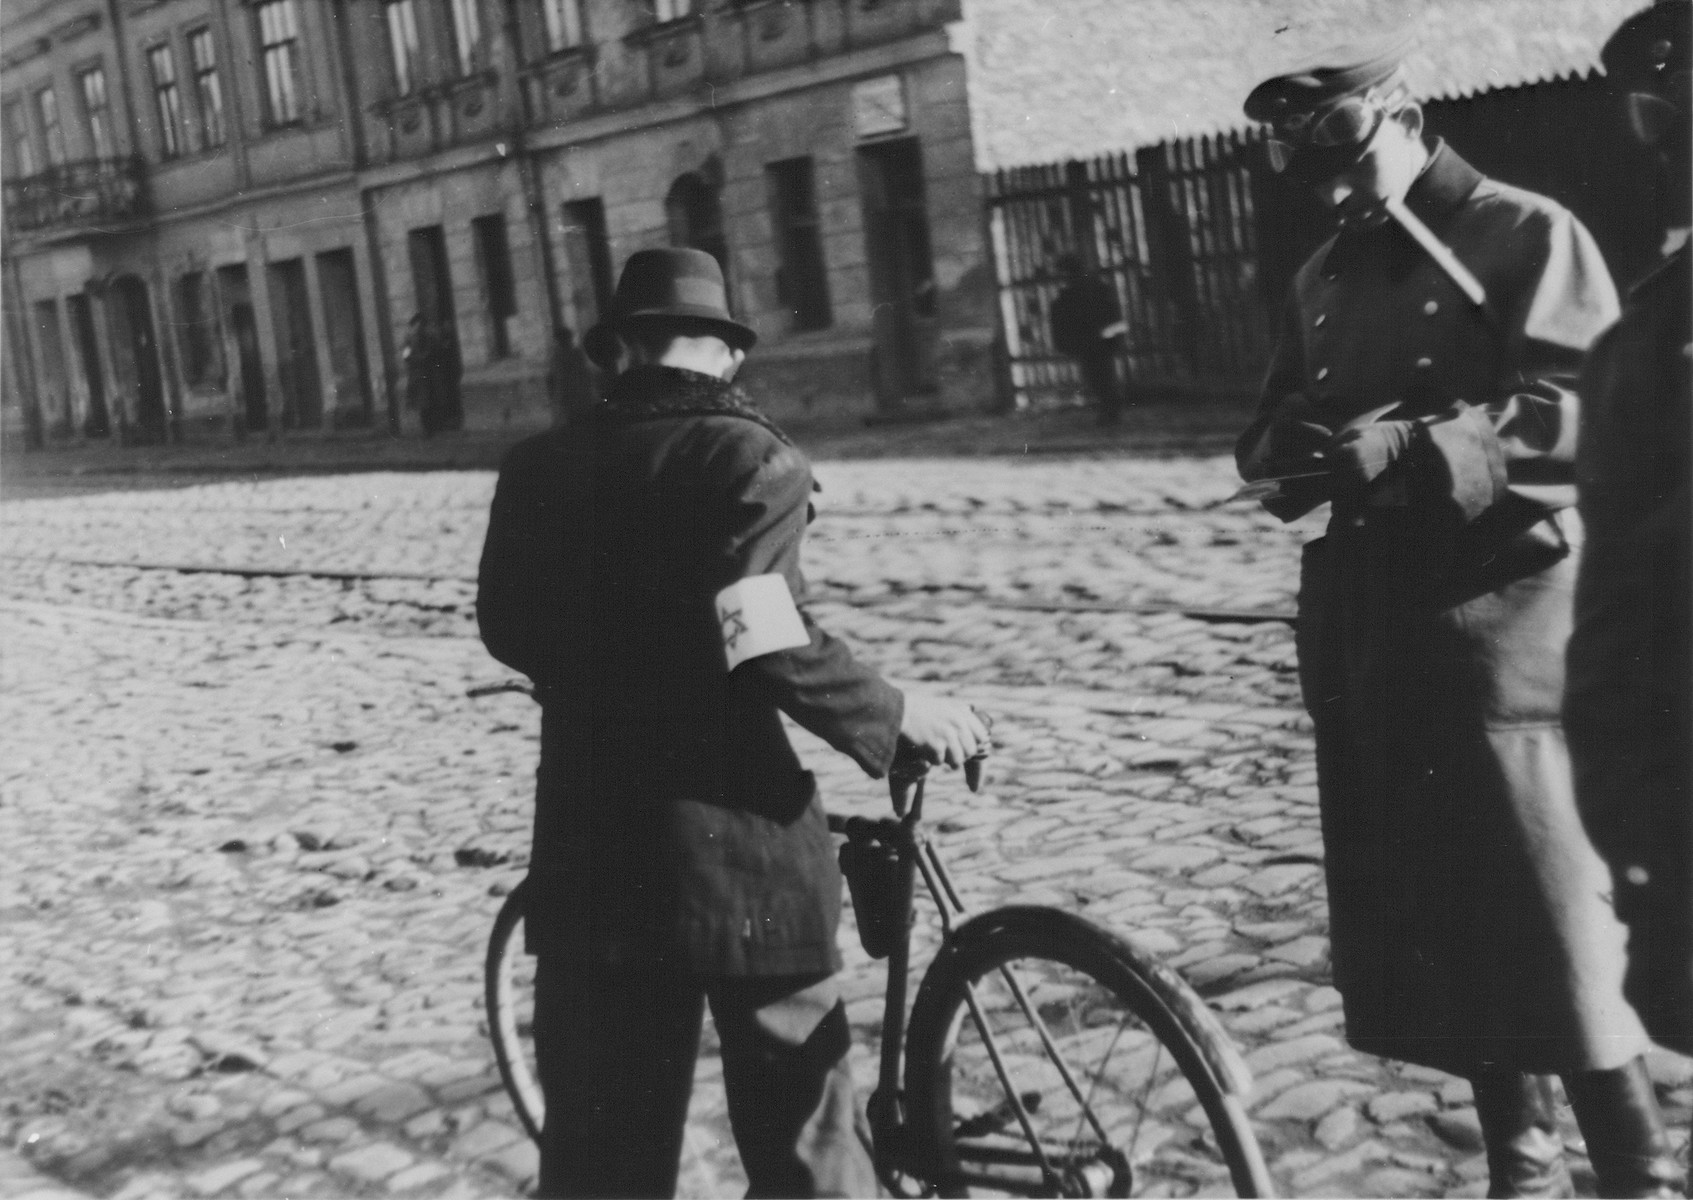 A German policeman checks the papers of a Jewish cyclist on a street in the Warsaw ghetto.